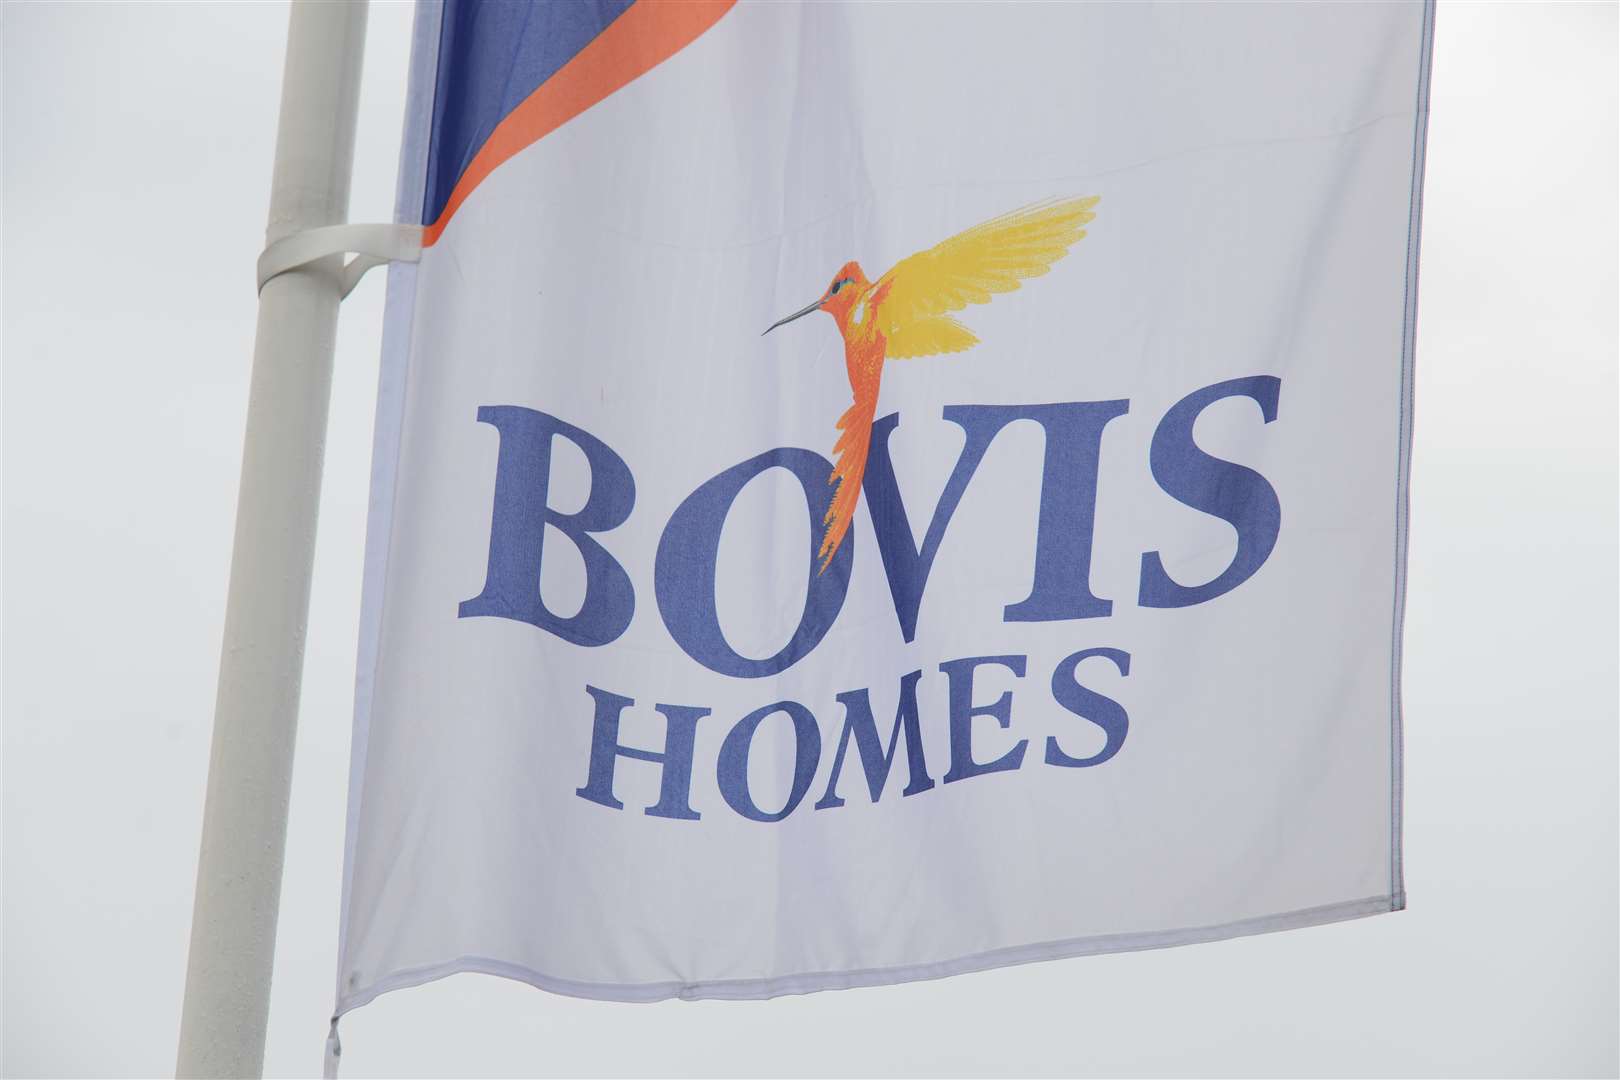 Bovis Homes is based in New Ash Green